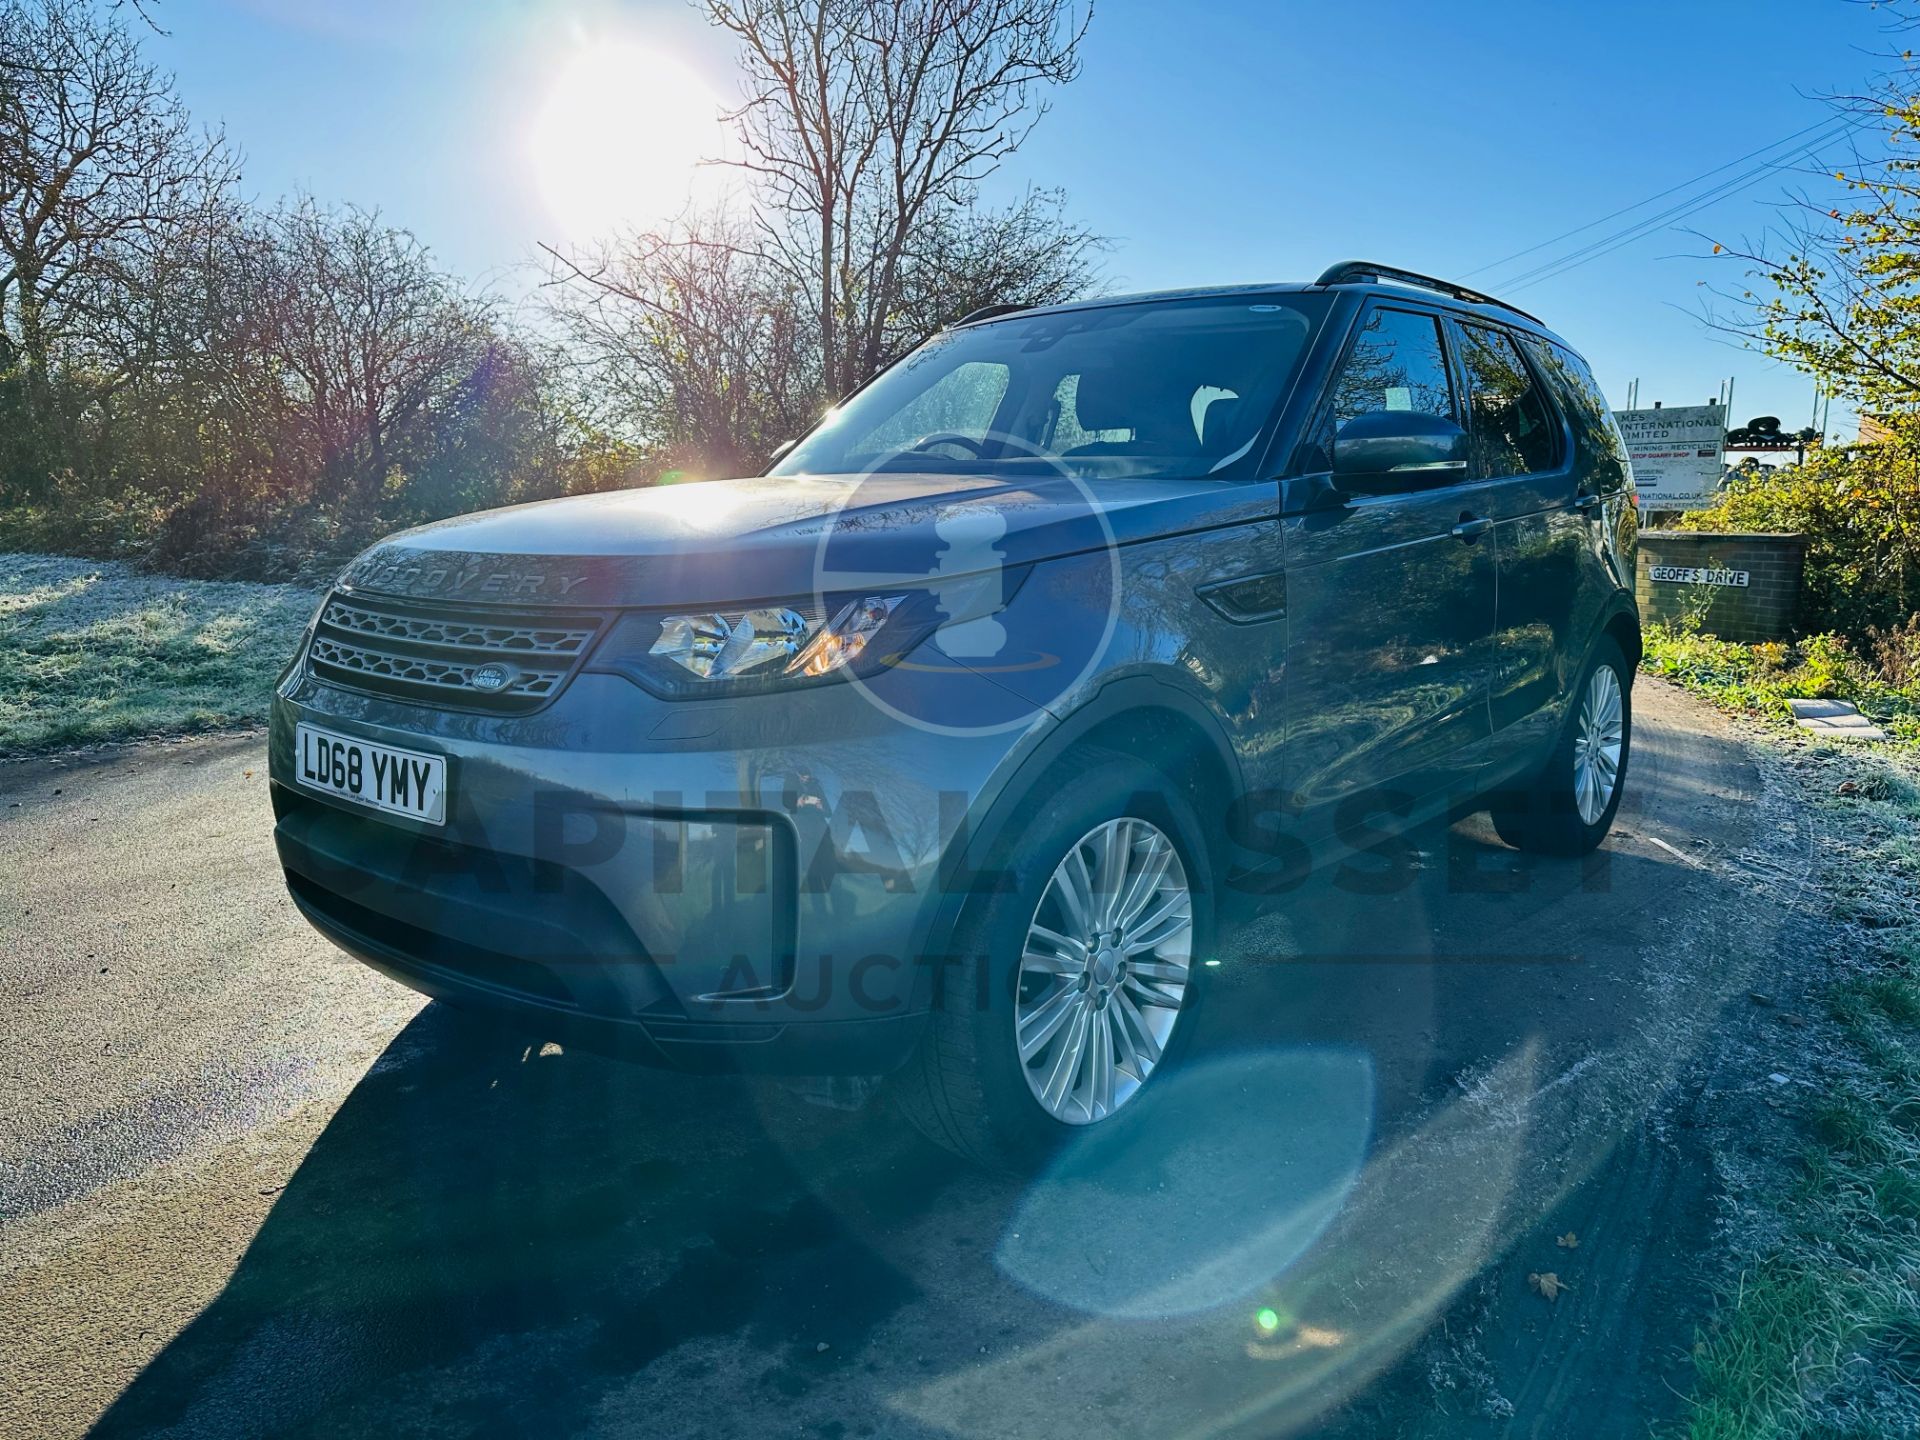 (ON SALE) LAND ROVER DISCOVERY 5 "AUTO DIESEL - 7 SEATER SUV - 2019 MODEL - ONLY 22K MILES FROM NEW - Image 4 of 41